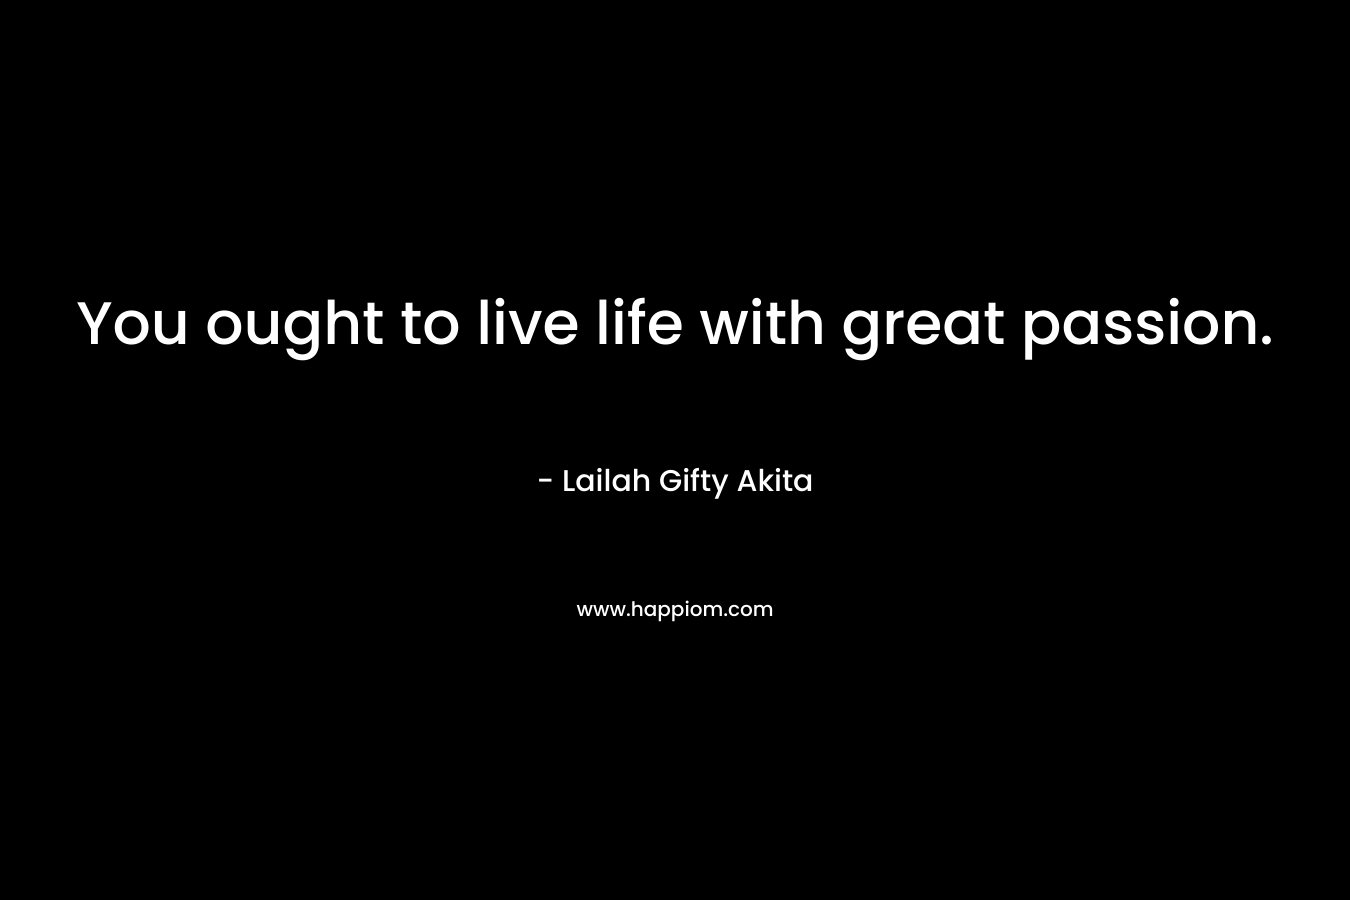 You ought to live life with great passion.